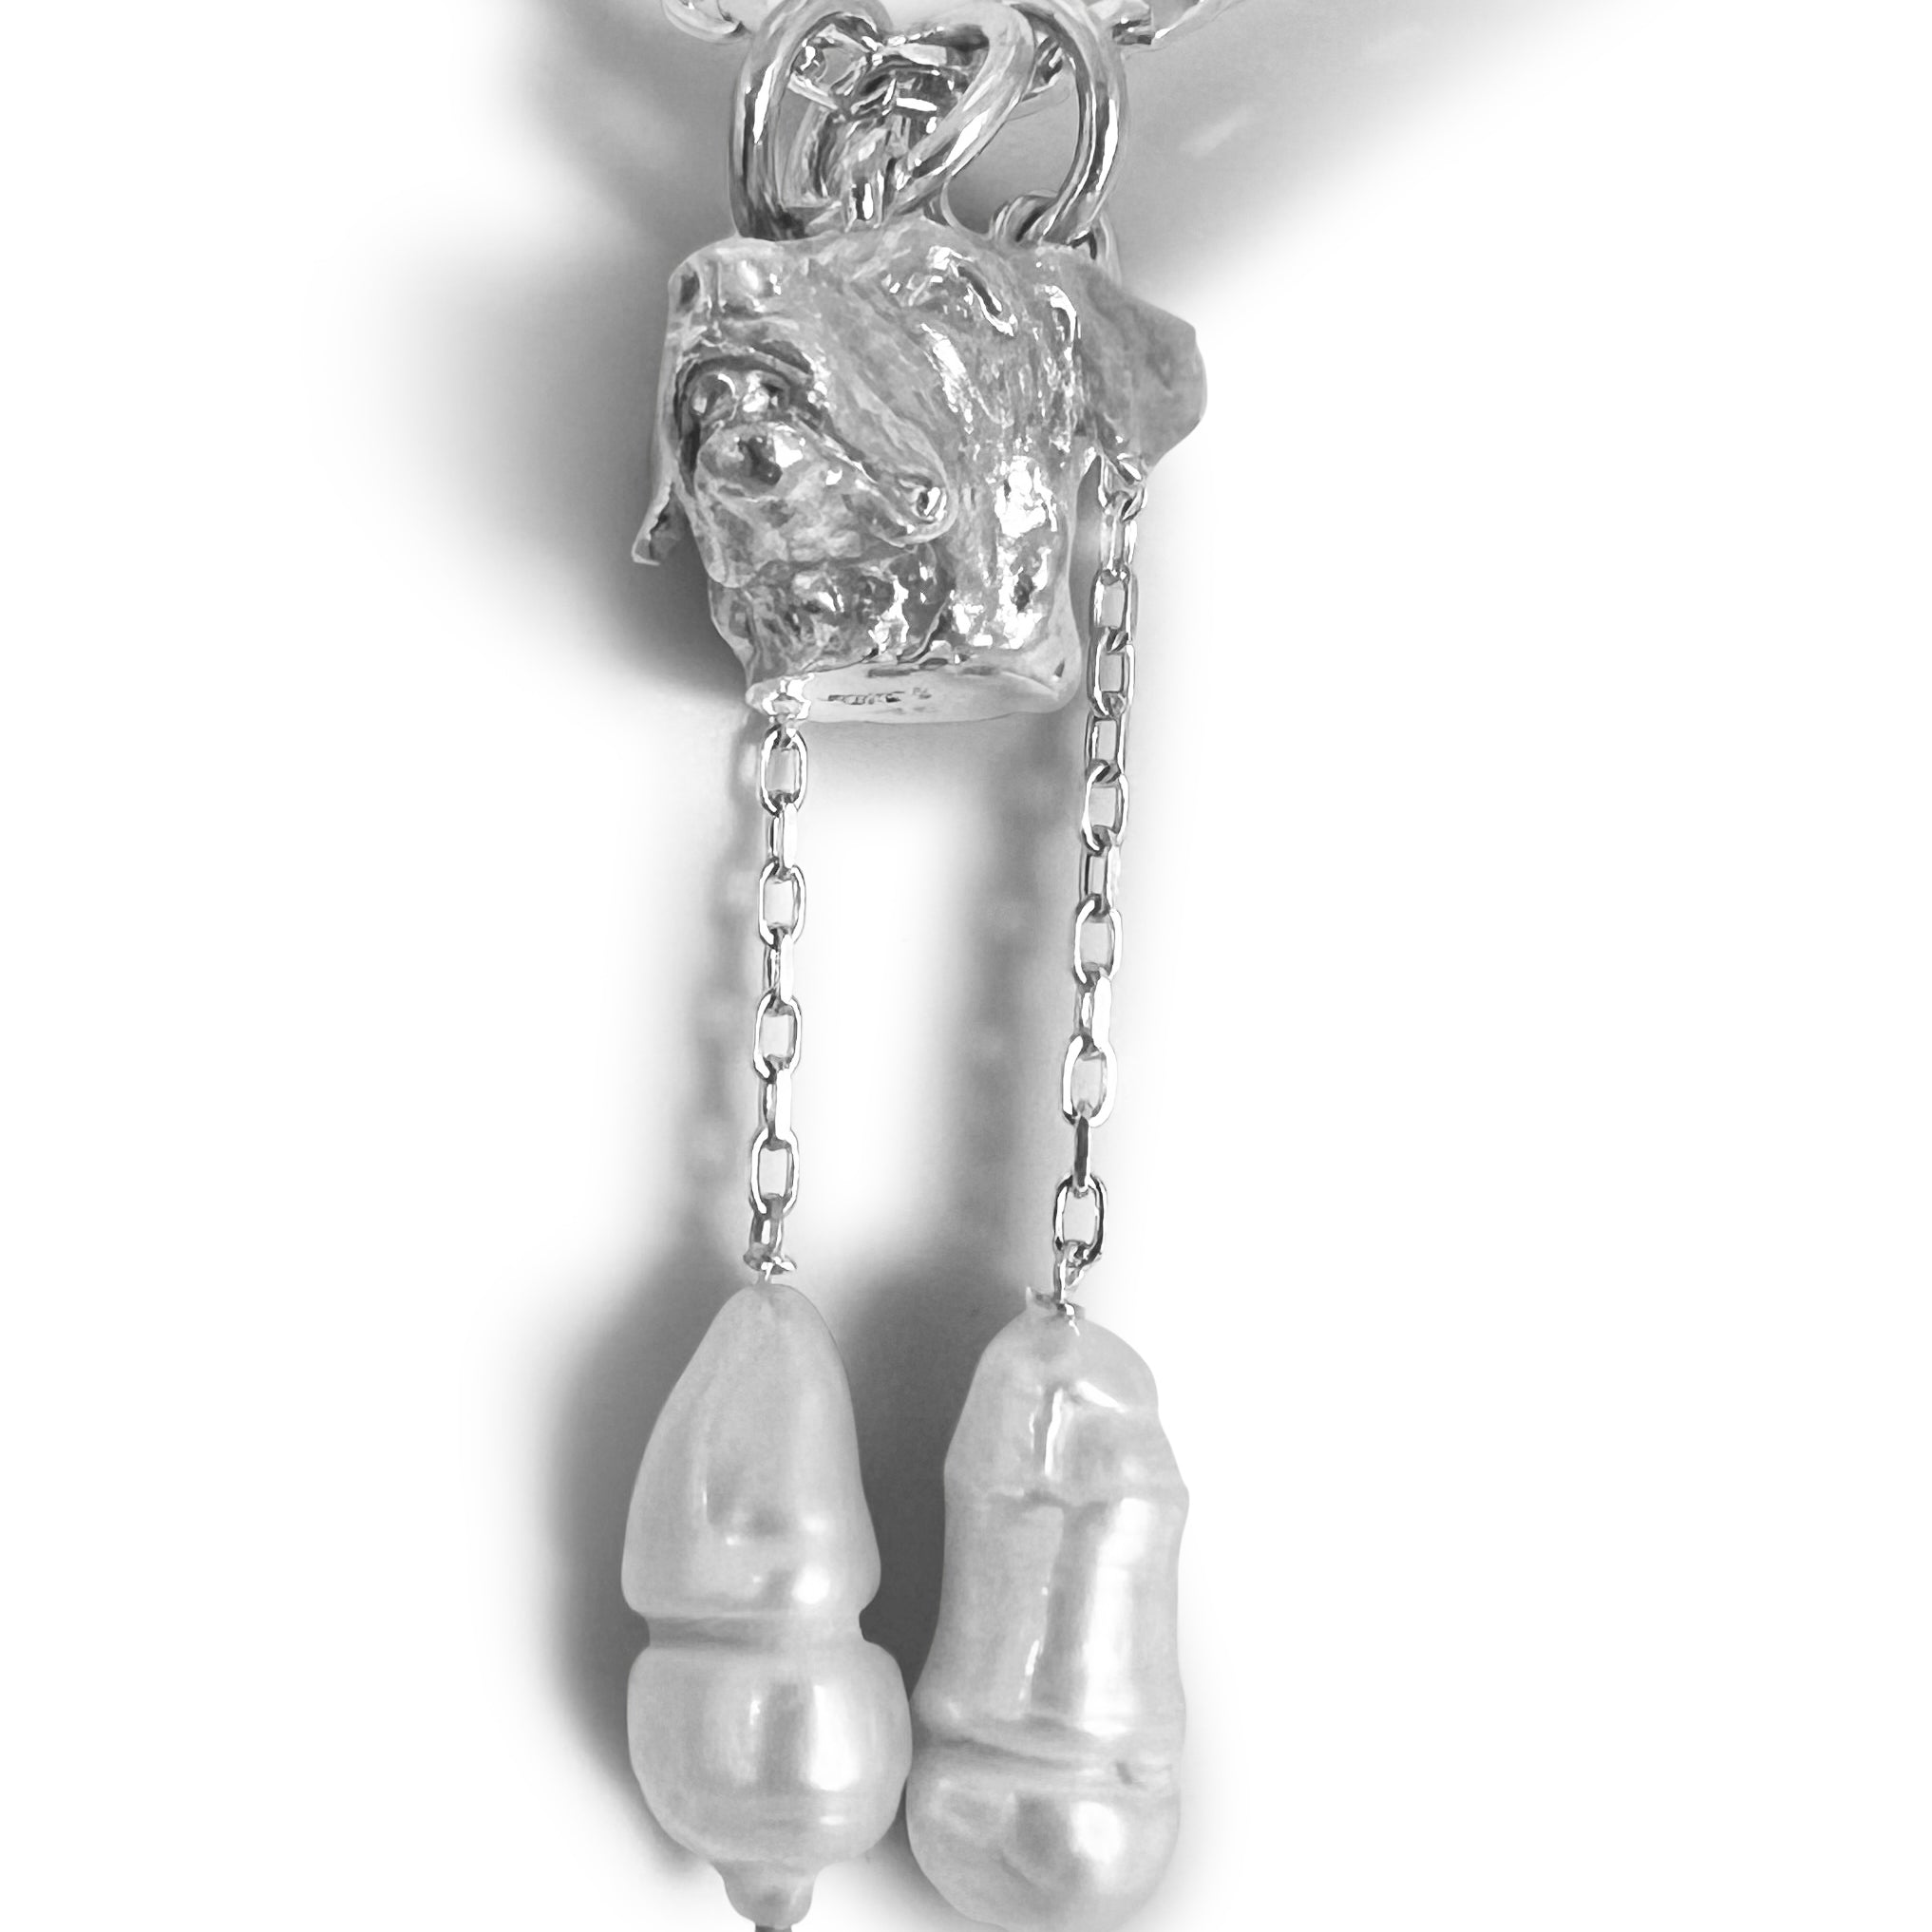 Rottweiler Pendant with Freshwater Pearls by Paul Eaton Sculptor/Silversmilth